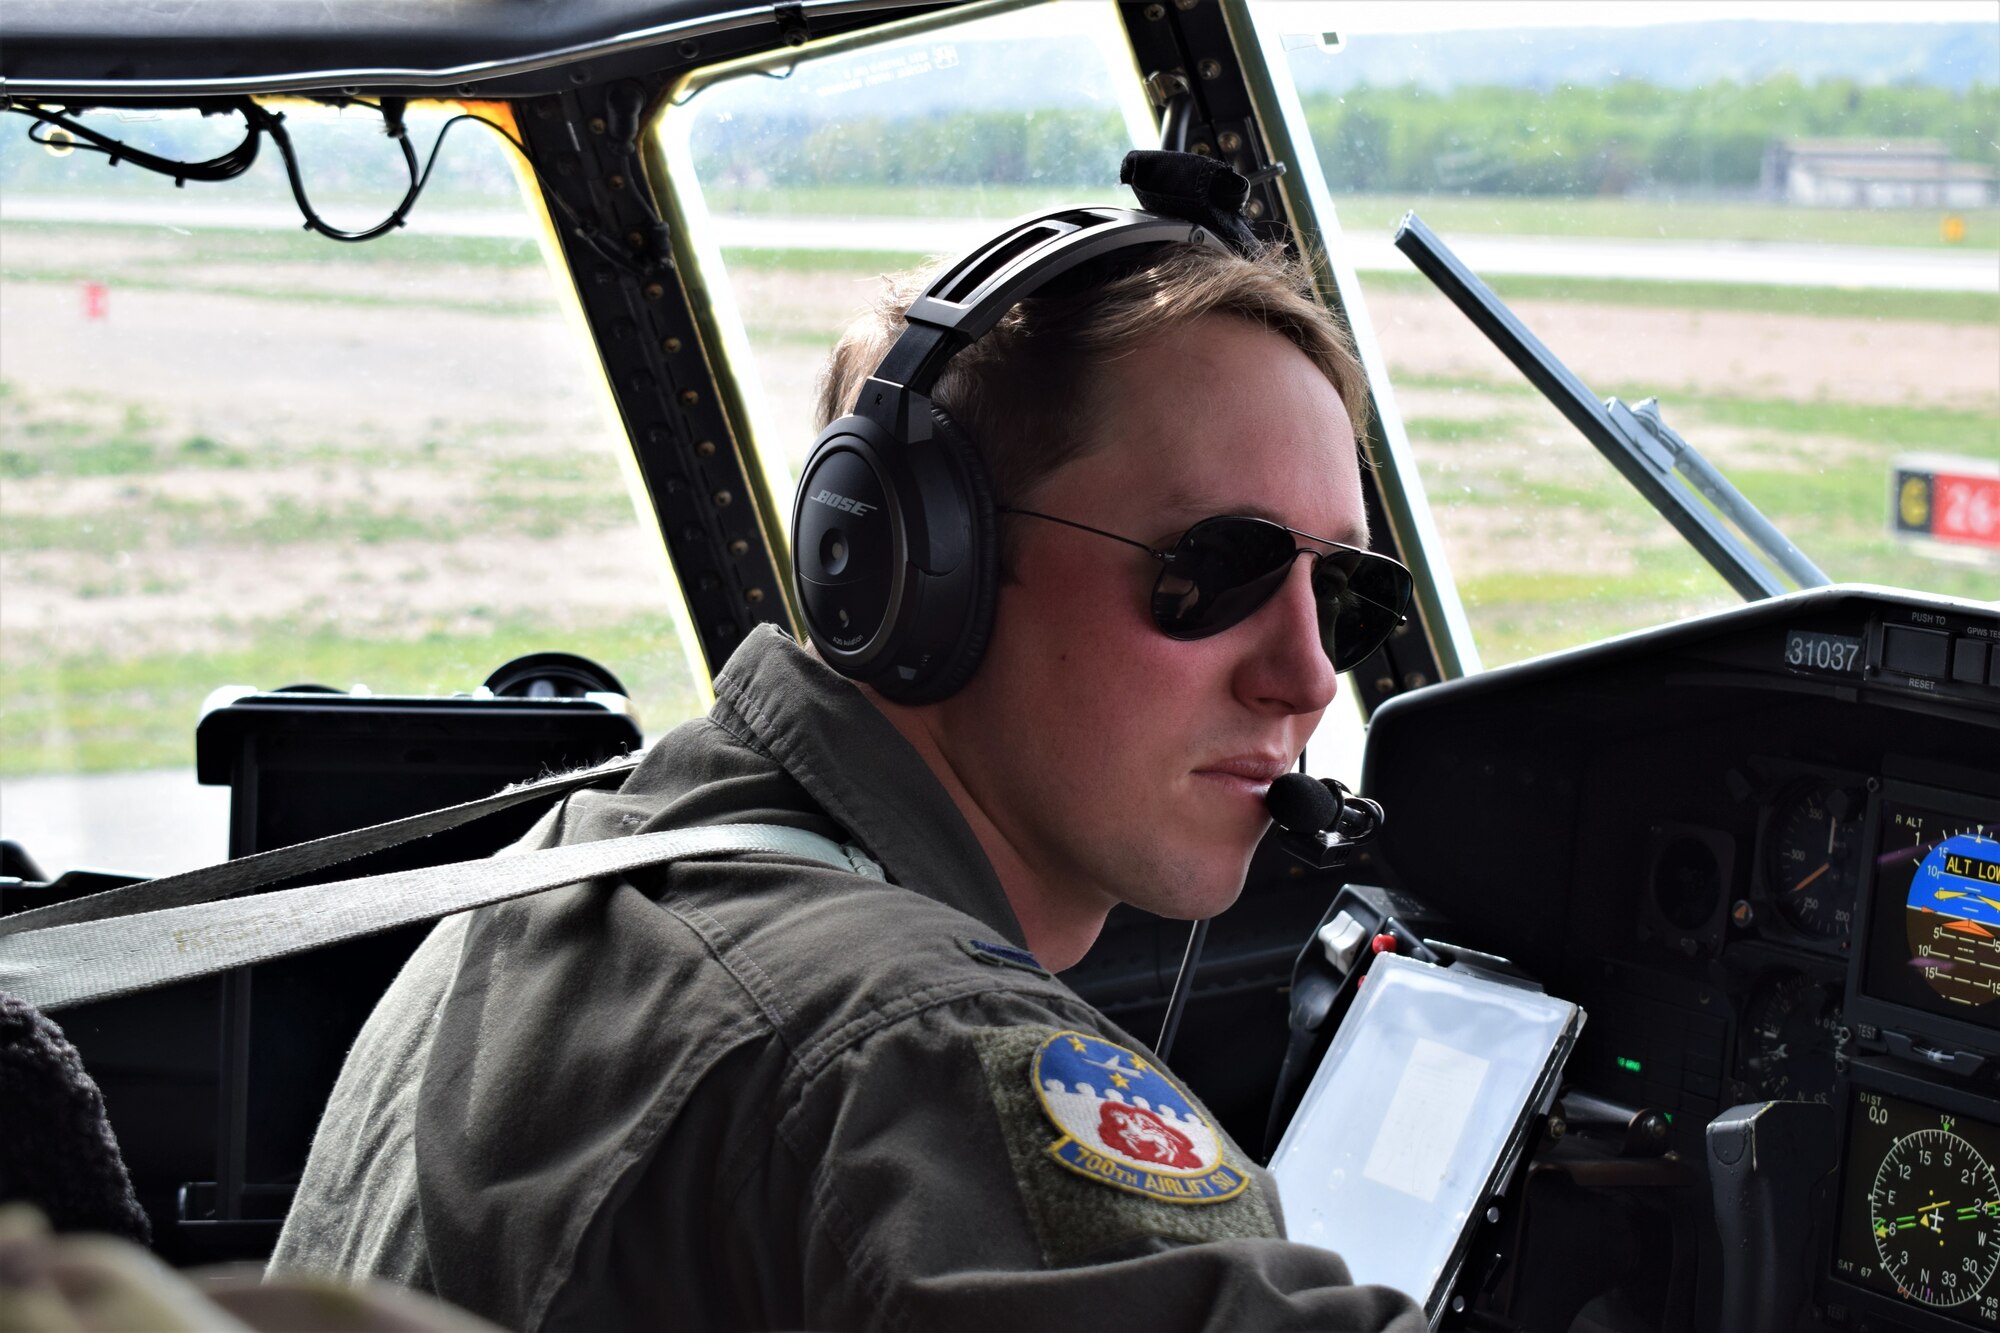 1st Lt. Ryan Day, co-pilot, 700th Airlift Squadron, 94th Airlift Wing, Dobbins Air Reserve Base, Ga., taxis a C-130H aircraft during Silver Arrow 19, Ramstein Air Base, Germany, April 23, 2019. Silver Arrow 19 is a six-month surge of airlift capability in the U.S. European Command theater of operations, supported by Airmen from the U.S. Air Force Reserves and Air National Guard. 

At any time, Silver Arrow 19 allows for two C-130H aircraft to augment U.S. combatant command requirements, support readiness events under the Chairman of the Joint Chiefs of Staff (CJCS) exercise program, and enables other unique mission and unit training requirements as needed. 



Silver Arrow 19 is underwritten by the European Deterrence Initiative (EDI), a Department of Defense fund that enhances responsiveness and readiness by pre-positioning assets and equipment, as well as by improving infrastructure to support day-to-day activities within the U.S. European Command area of responsibility. The EDI also enhances the U.S.’s ability to provide a rapid response against threats made by aggressive regional actors.